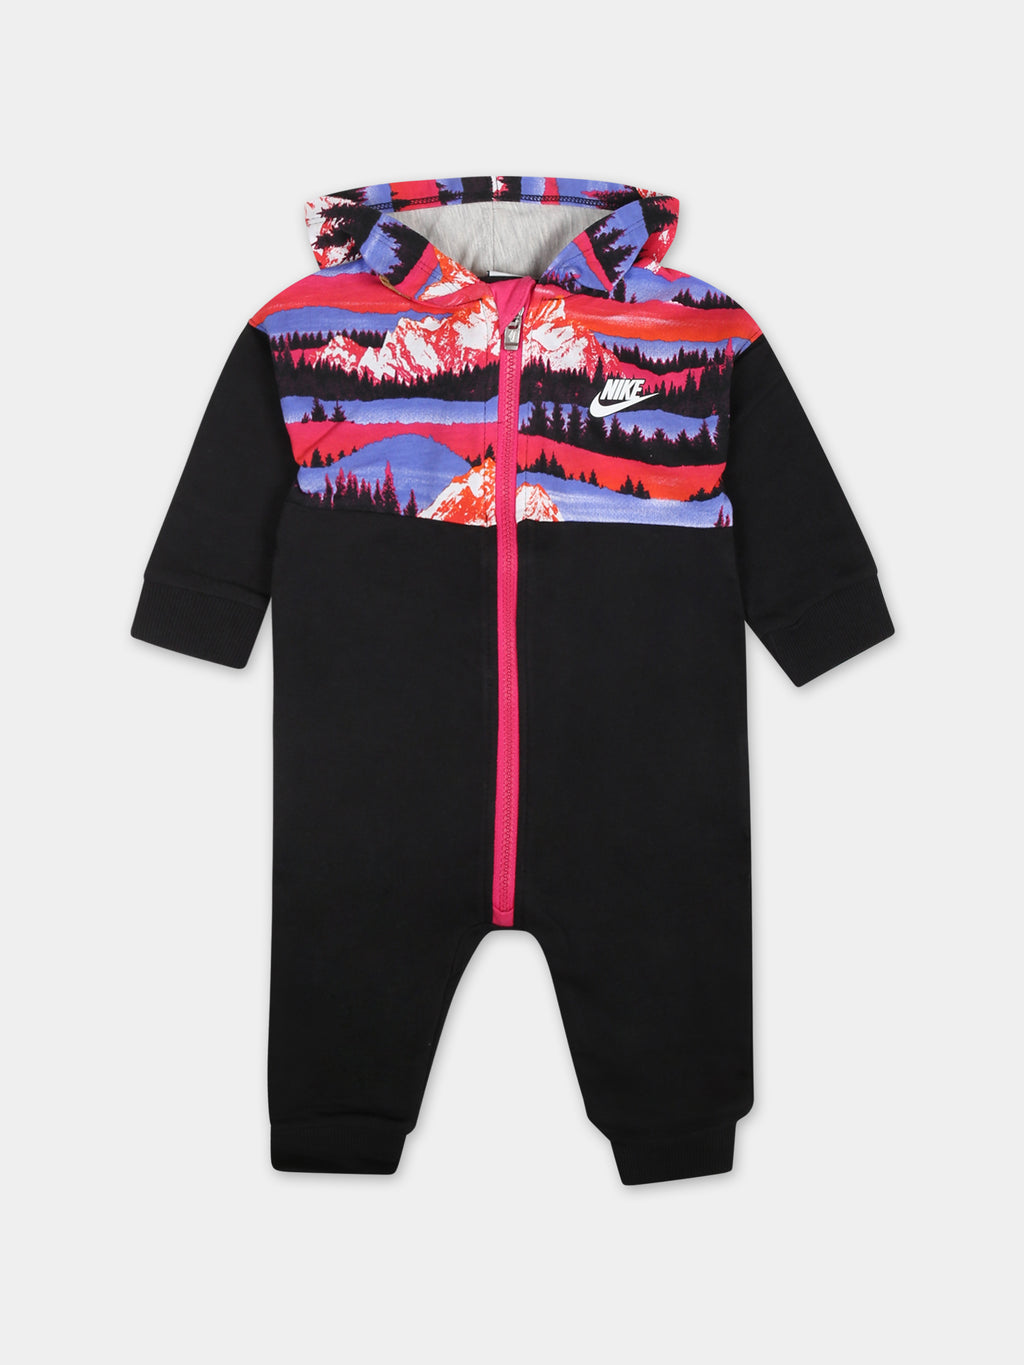 Black babygrow for baby girl with logo